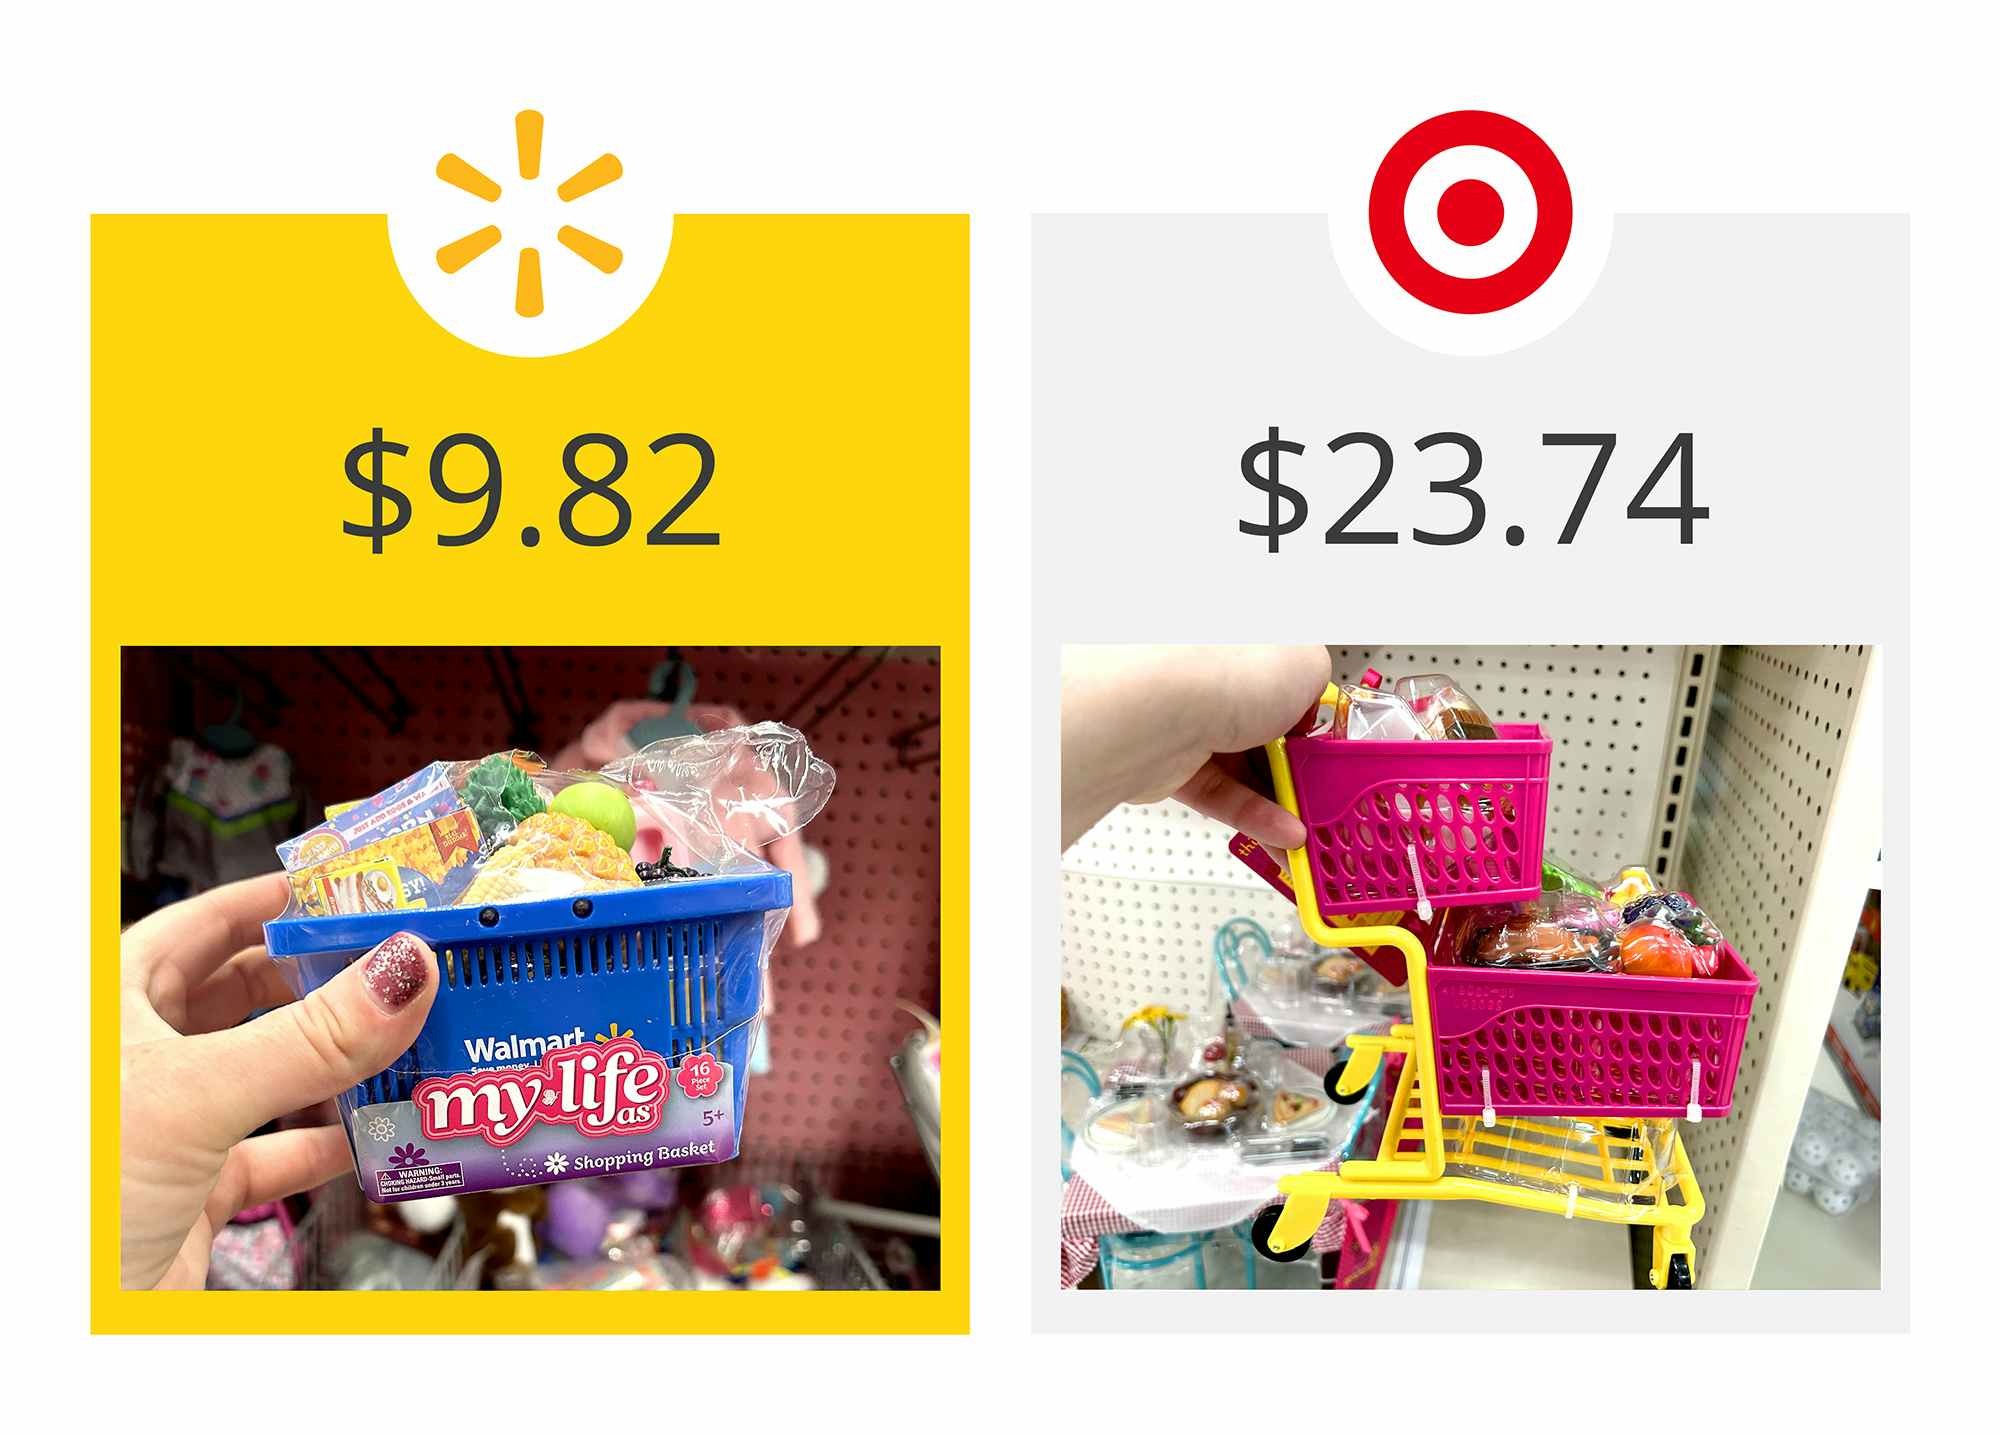 walmart as the winner on a graphic showing price comparison between target's our generation and walmart's my life as doll shopping cart and basket